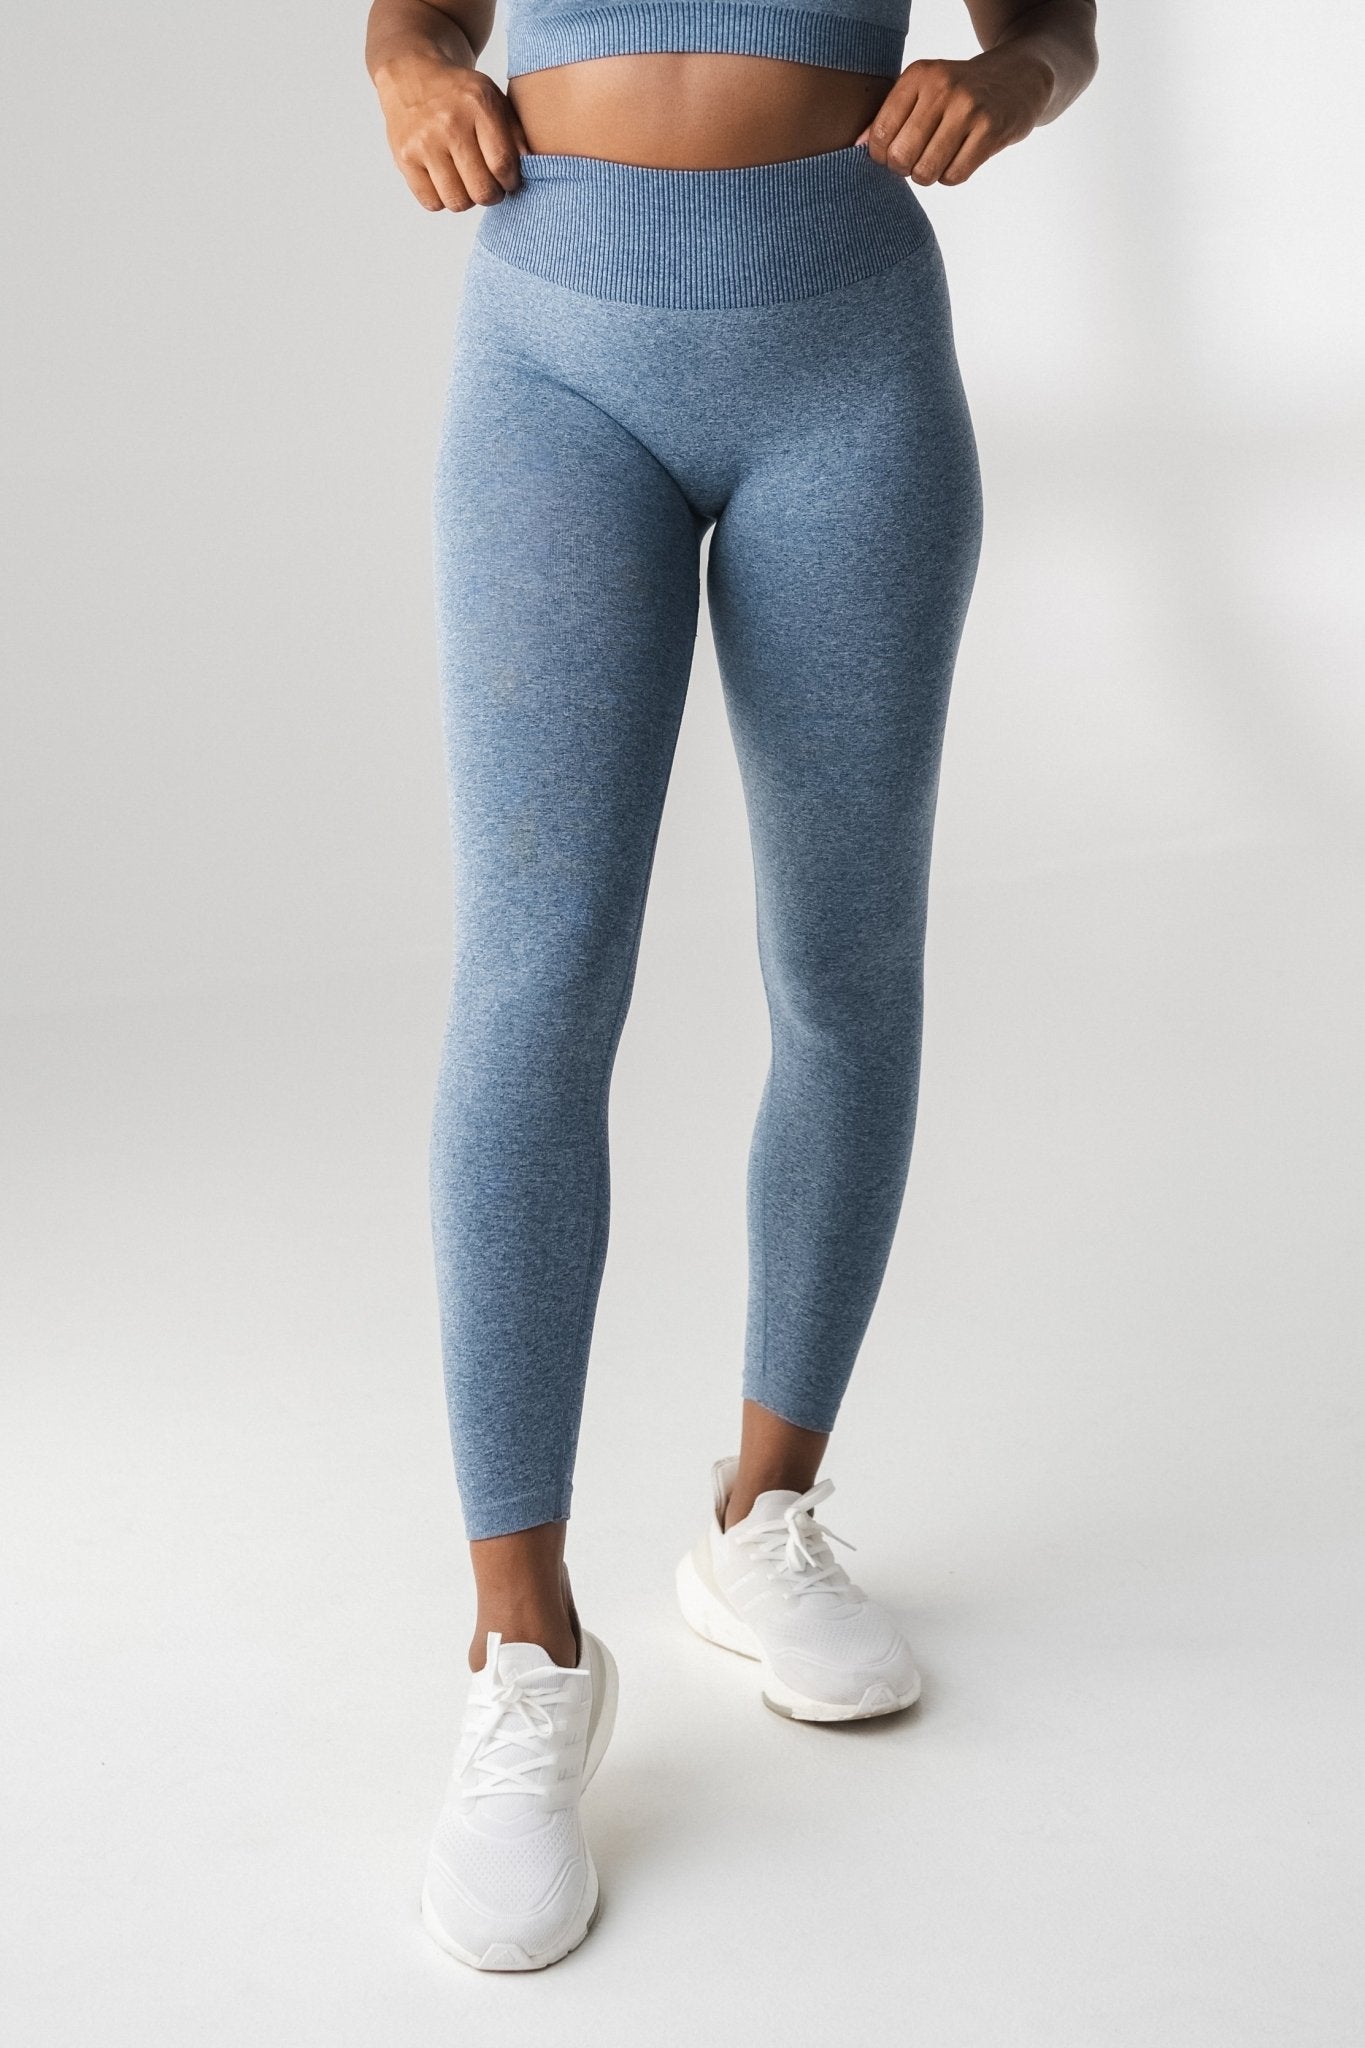 Women's Athletic Bottoms - Shorts, Joggers, Leggings, & Pants – Tagged  prodgroup::cozytrouser – Vitality Athletic Apparel